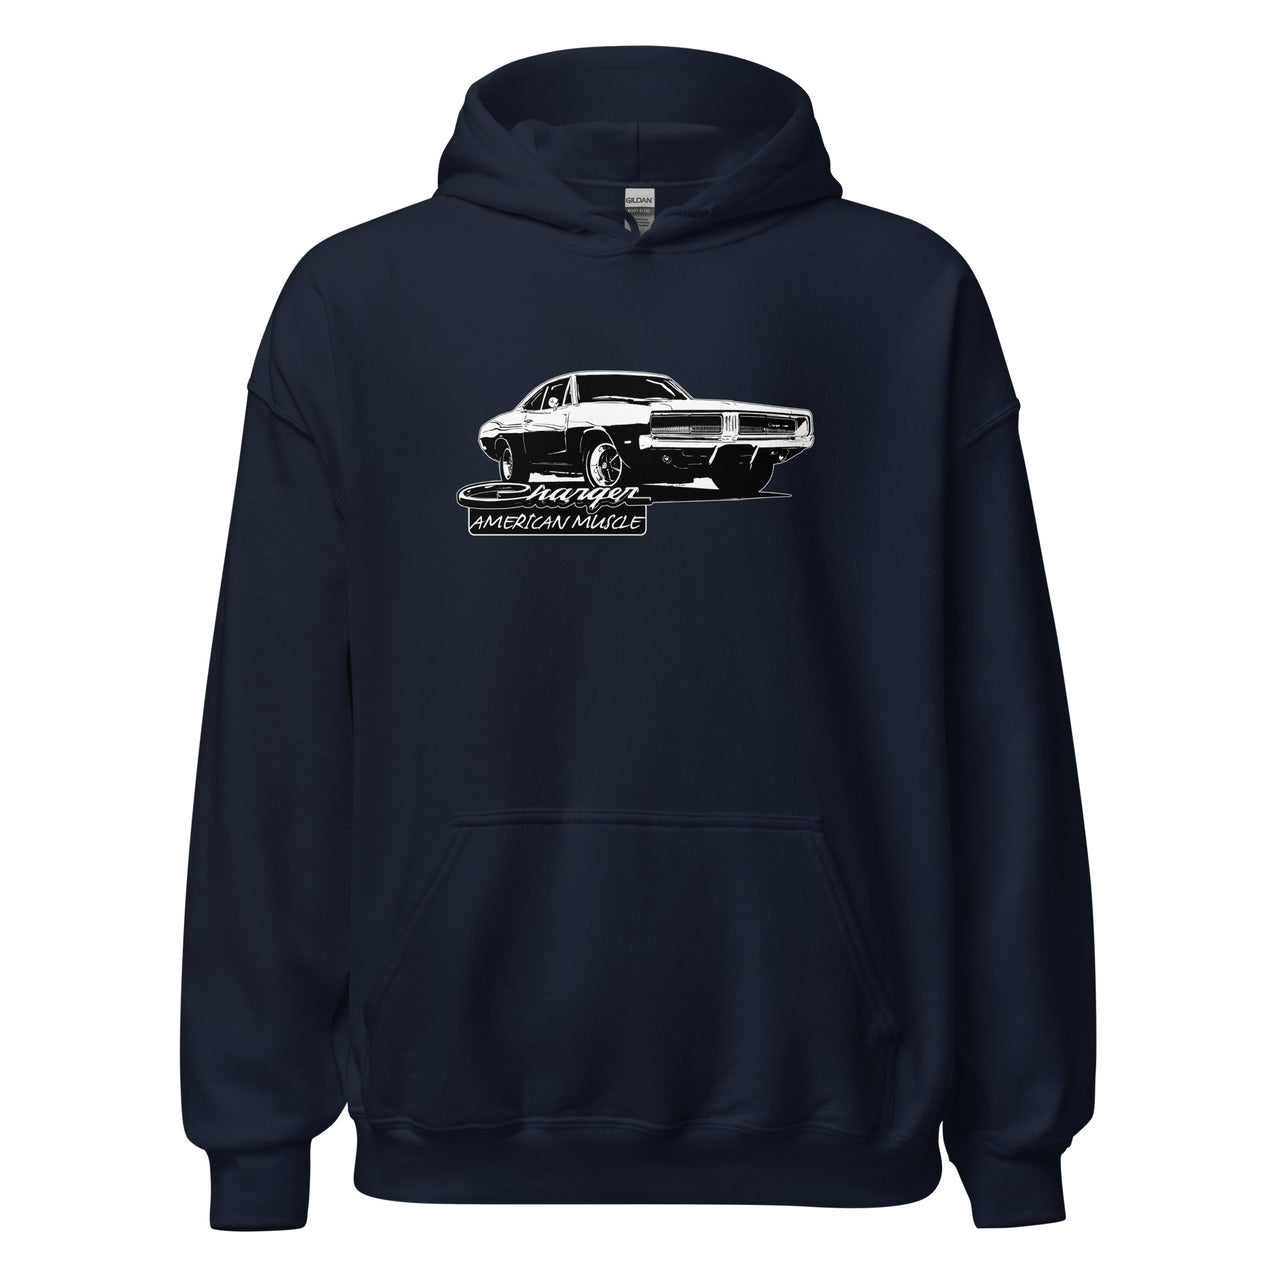 1969 Charger Hoodie in navy